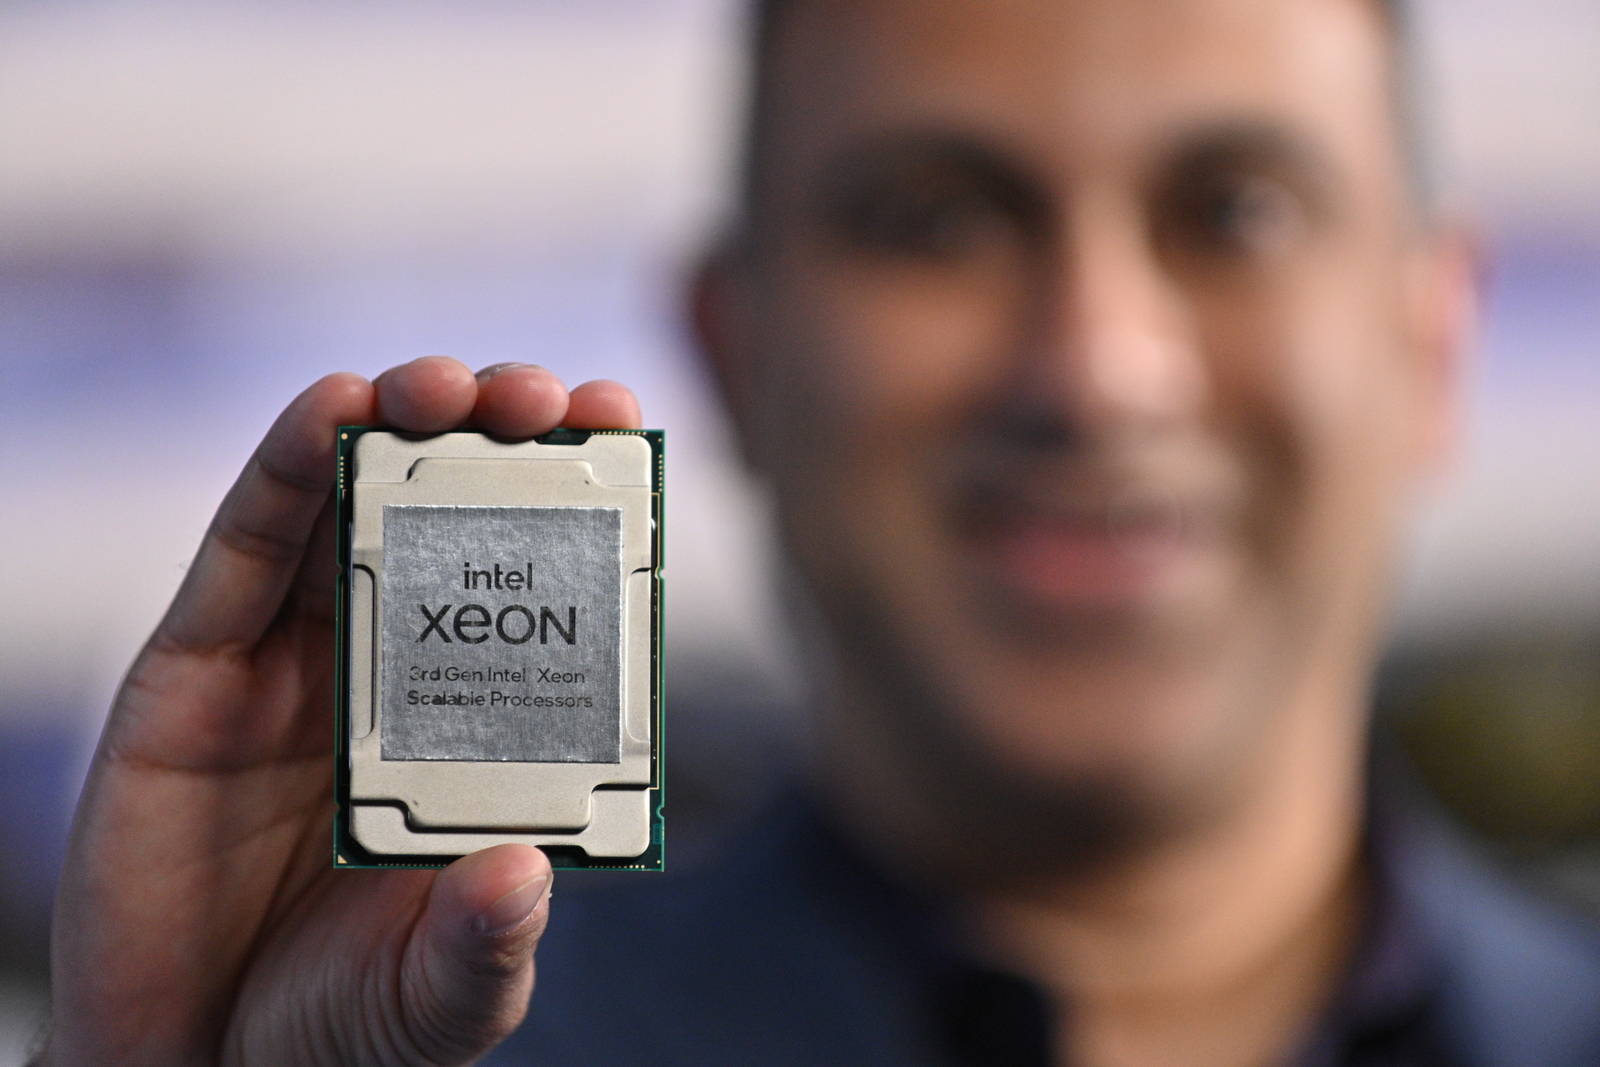 Intel patches up SGX best it can after another load of security holes found thumbnail